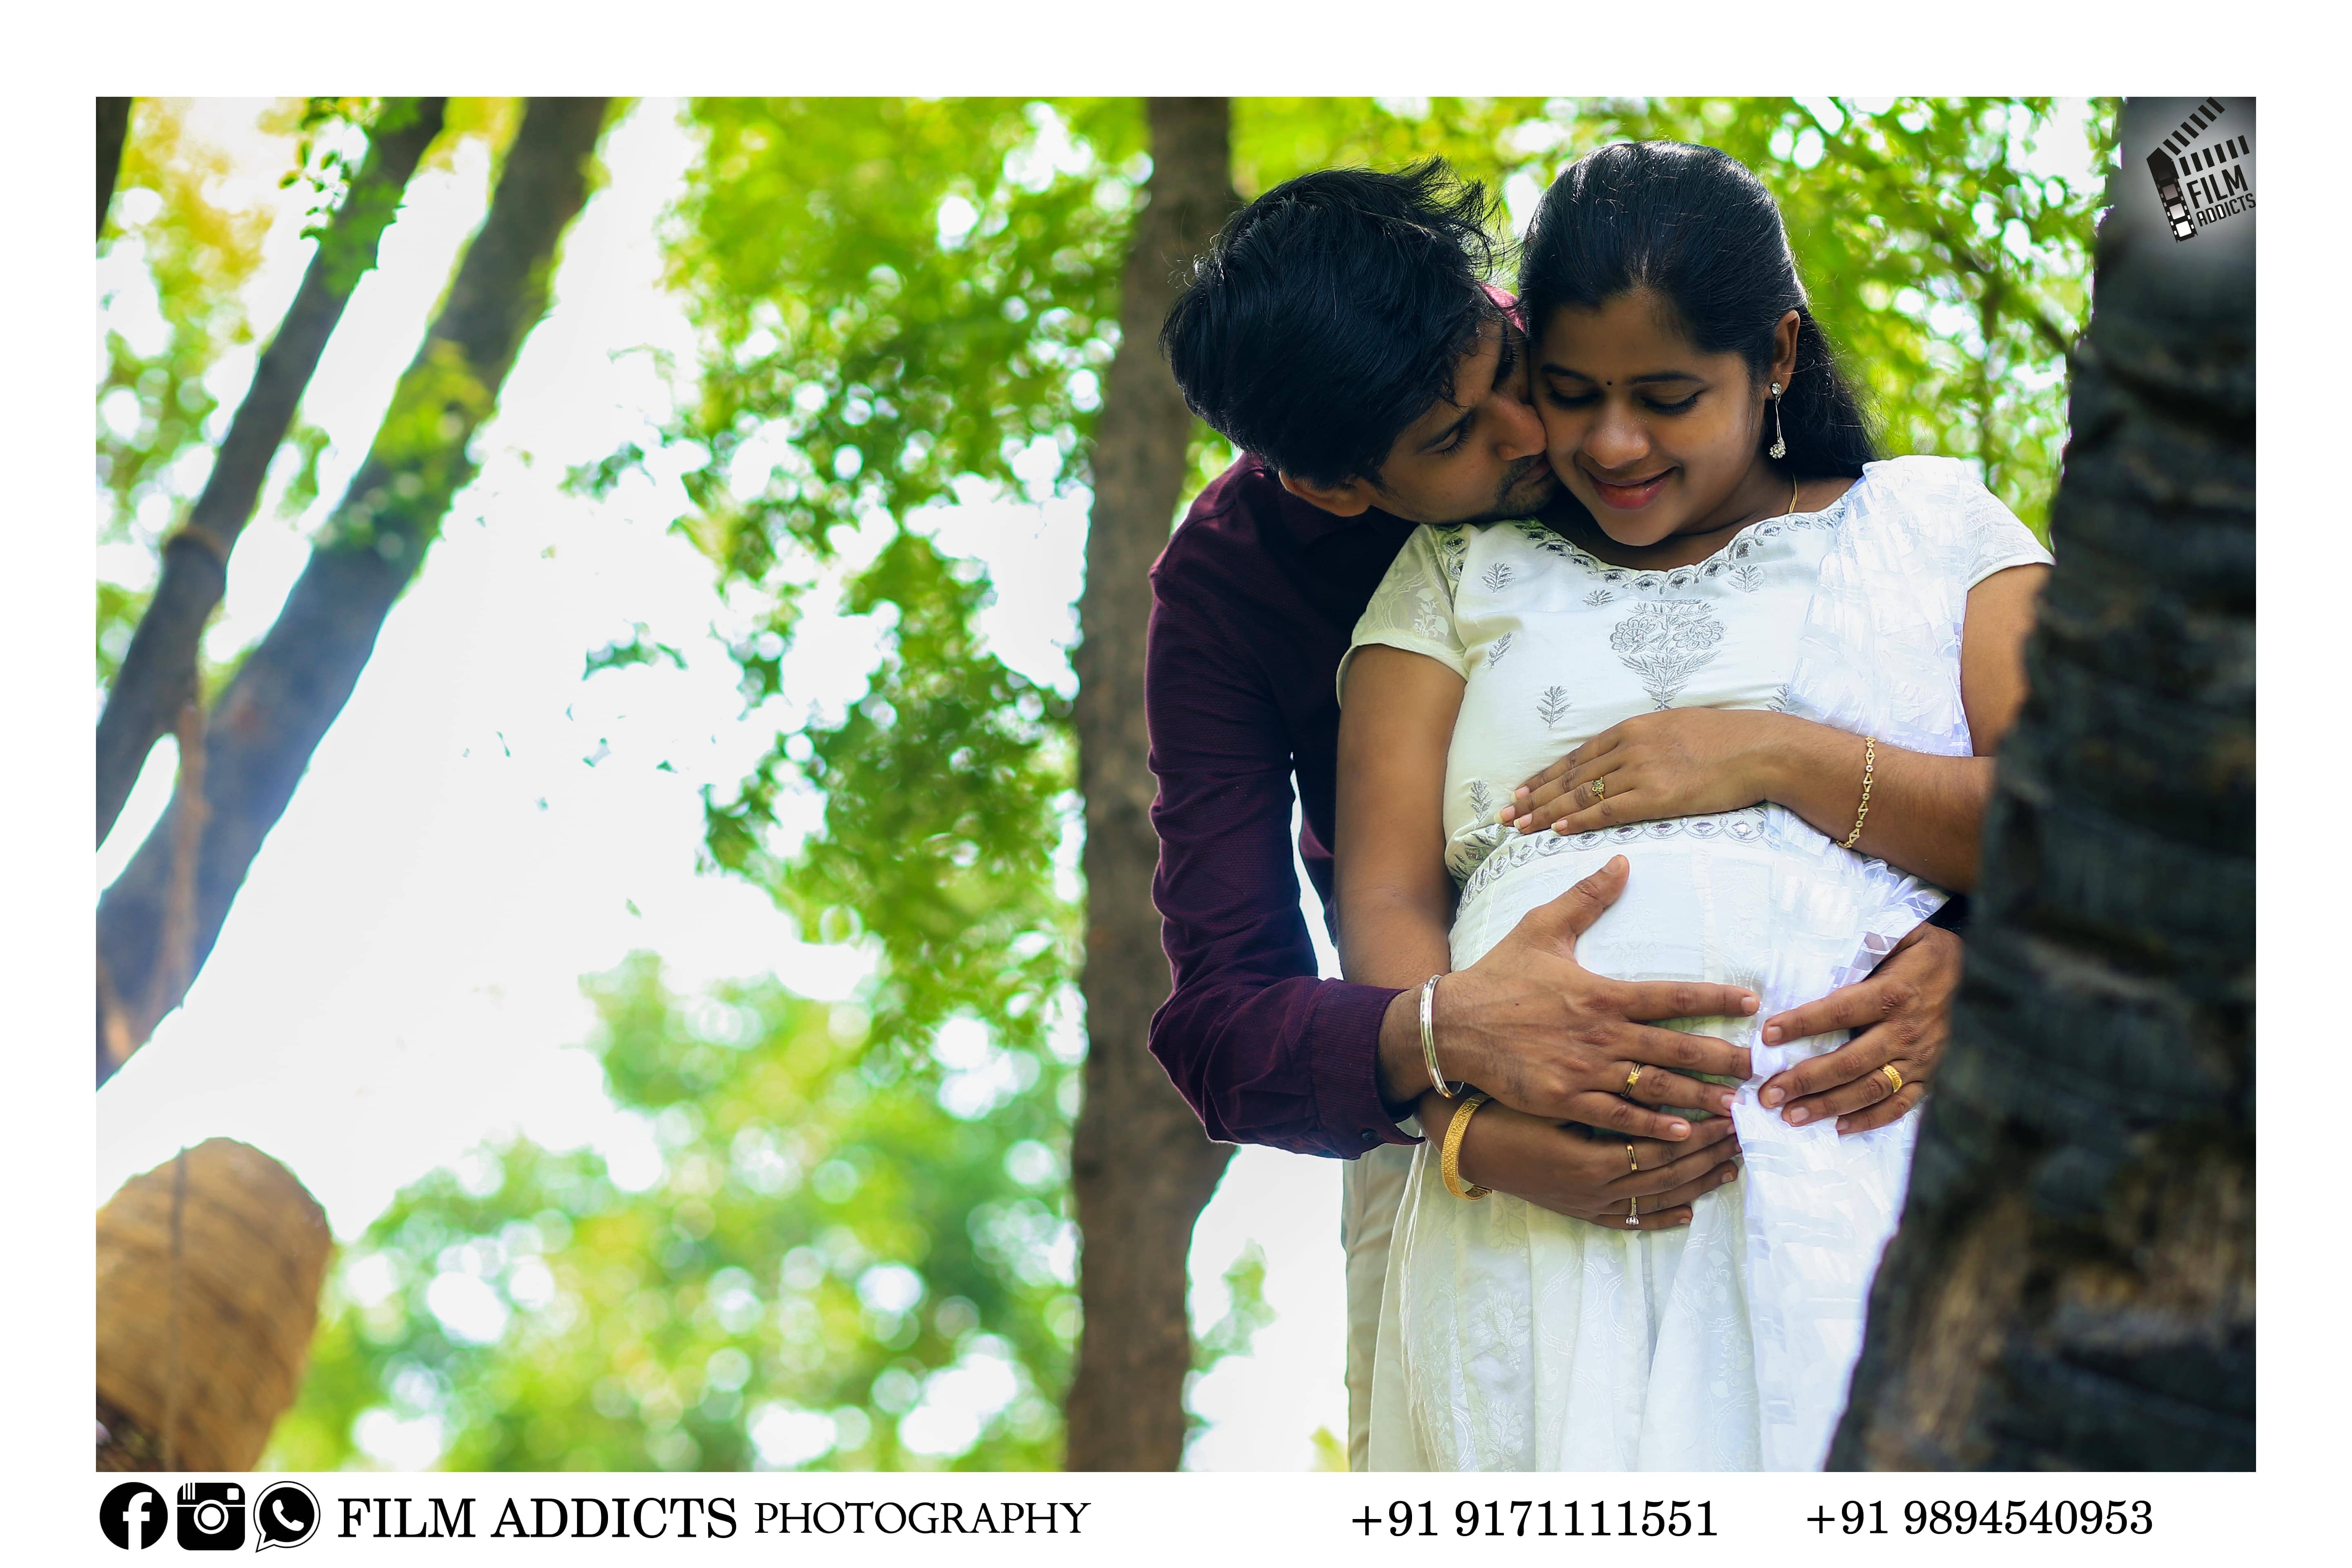 Best Maternity photographers in Trichy,Best Maternity photography in Trichy,Baby Shower Photography In Trichy,Baby Shower Photographers In Trichy,Best candid photographers in Trichy,Best candid photography in Trichy,Best marriage photographers in Trichy,Best marriage photography in Trichy,Best photographers in Trichy,Best photography in Trichy,Best Maternity candid photography in Trichy,Best Maternity candid photographers in Trichy,Best Maternity video in Trichy,Best Maternity videographers in Trichy,Best Maternity videography in Trichy,Best candid videographers in Trichy,Best candid videography in Trichy,Best marriage videographers in Trichy,Best marriage videography in Trichy,Best videographers in Trichy,Best videography in Trichy,Best Maternity candid videography in Trichy,Best Maternity candid videographers in Trichy,Best helicam operators in Trichy,Best drone operators in Trichy,Best Maternity studio in Trichy,Best Maternity photographers in Trichy,Best Maternity photography in Trichy,No.1 Maternity photographers in Trichy,No.1 Maternity photography in Trichy,Trichy Maternity photographers,Trichy Maternity photography,Trichy Maternity videos,Best candid videos in Trichy,Best candid photos in Trichy,Best helicam operators photography in Trichy,Best helicam operator photographers in Trichy,Best Maternity videography in Trichy,Best Maternity photography in Trichy,Best Maternity photography in Trichy,Best Maternity photographers in Trichy,Best drone operators photographers in Trichy,Best Maternity candid videography in Trichy,tamilnadu Maternity photography, tamilnadu.